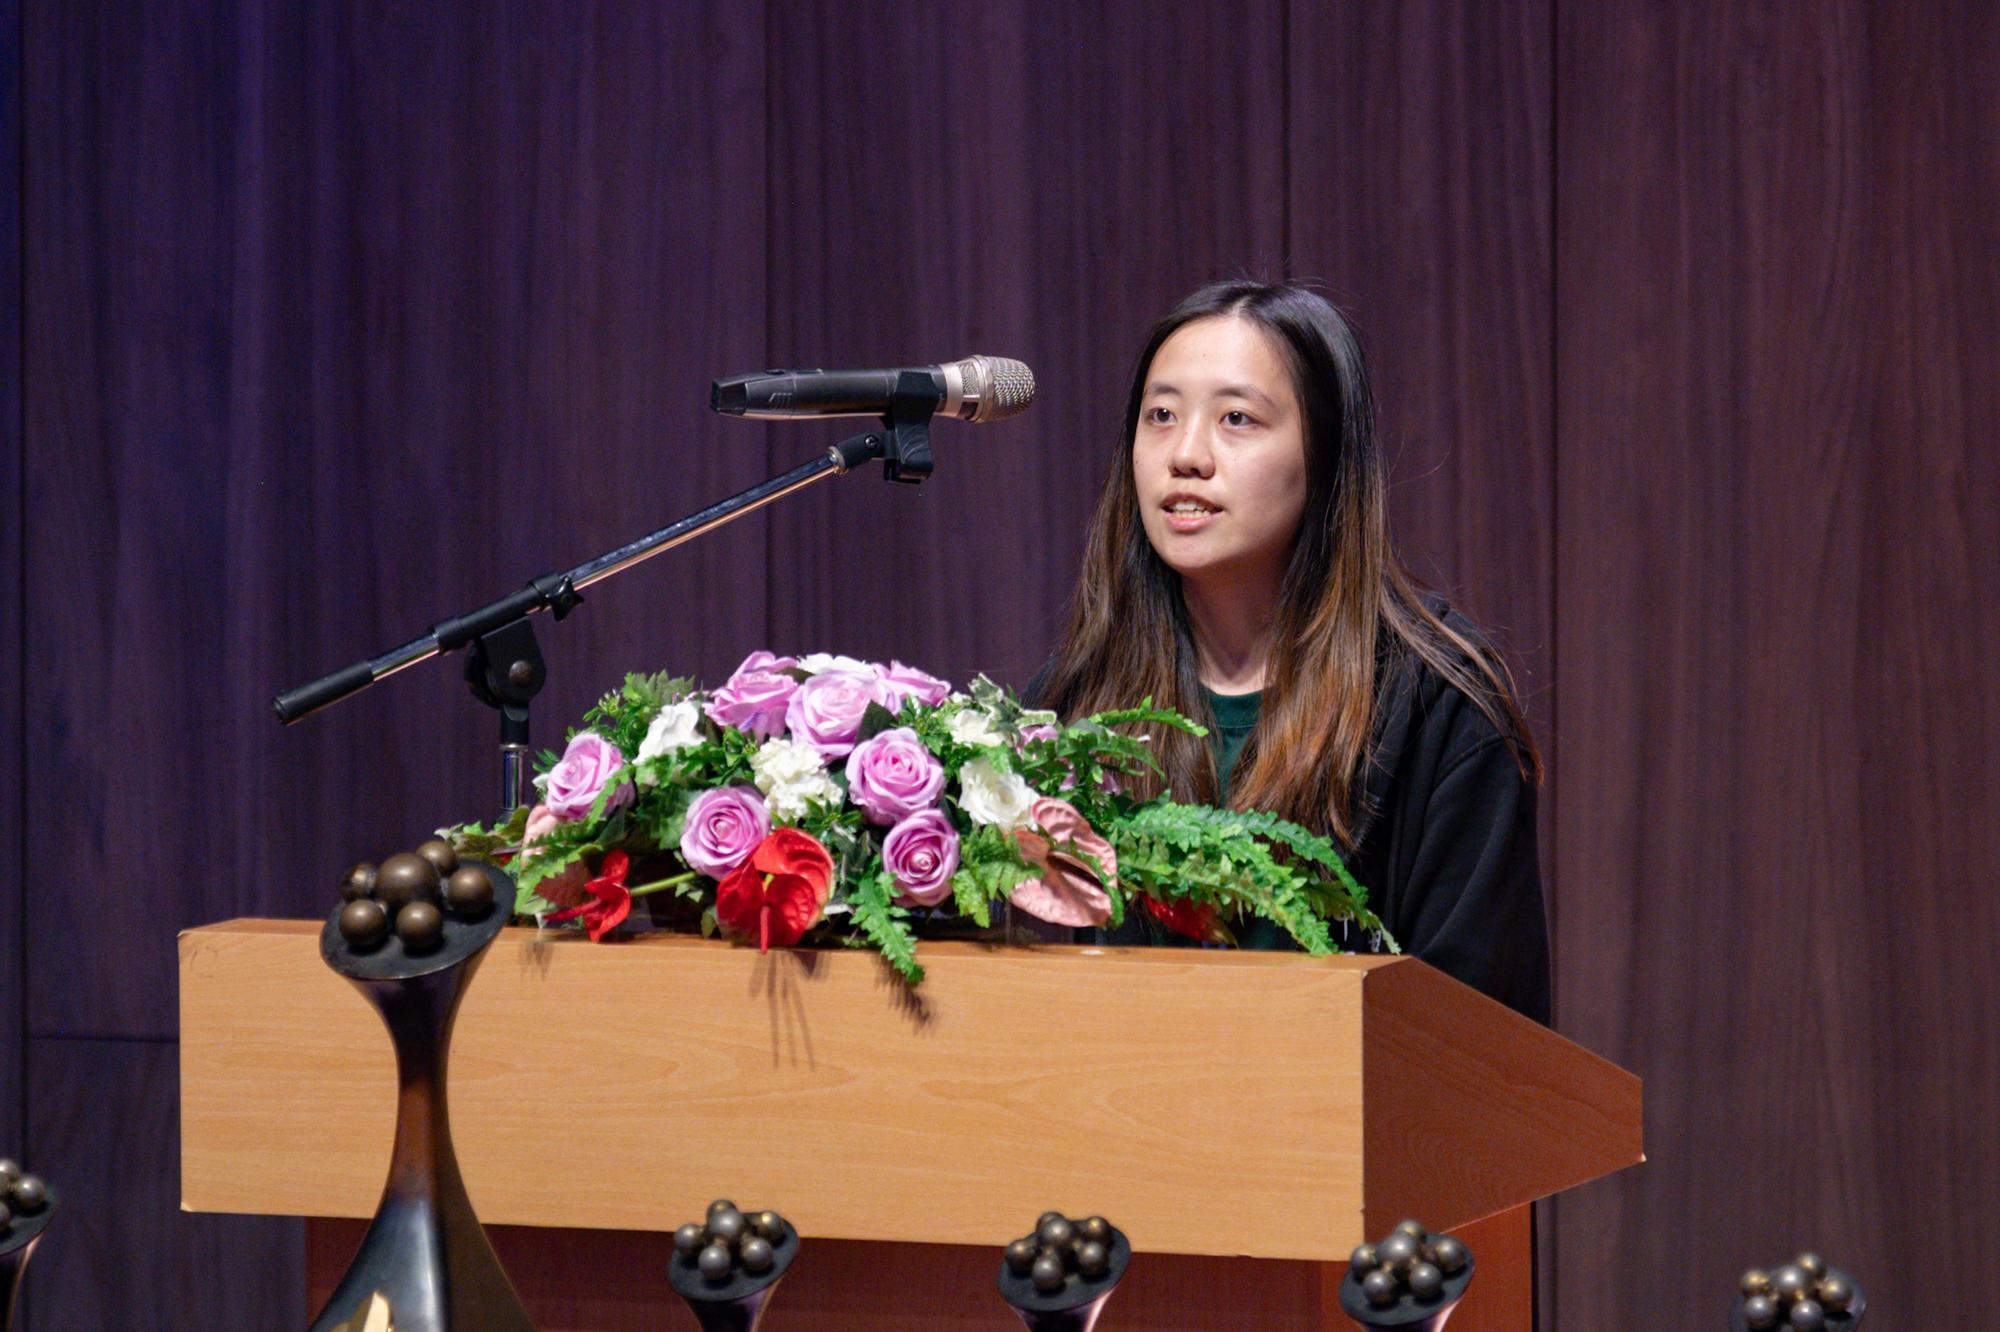 Pin-Wen Chiang (蔣品玟), a senior in the Interdisciplinary Program of Education at NTHU, served as this year's overall coordinator and expressed hope that all students would participate with enthusiasm.